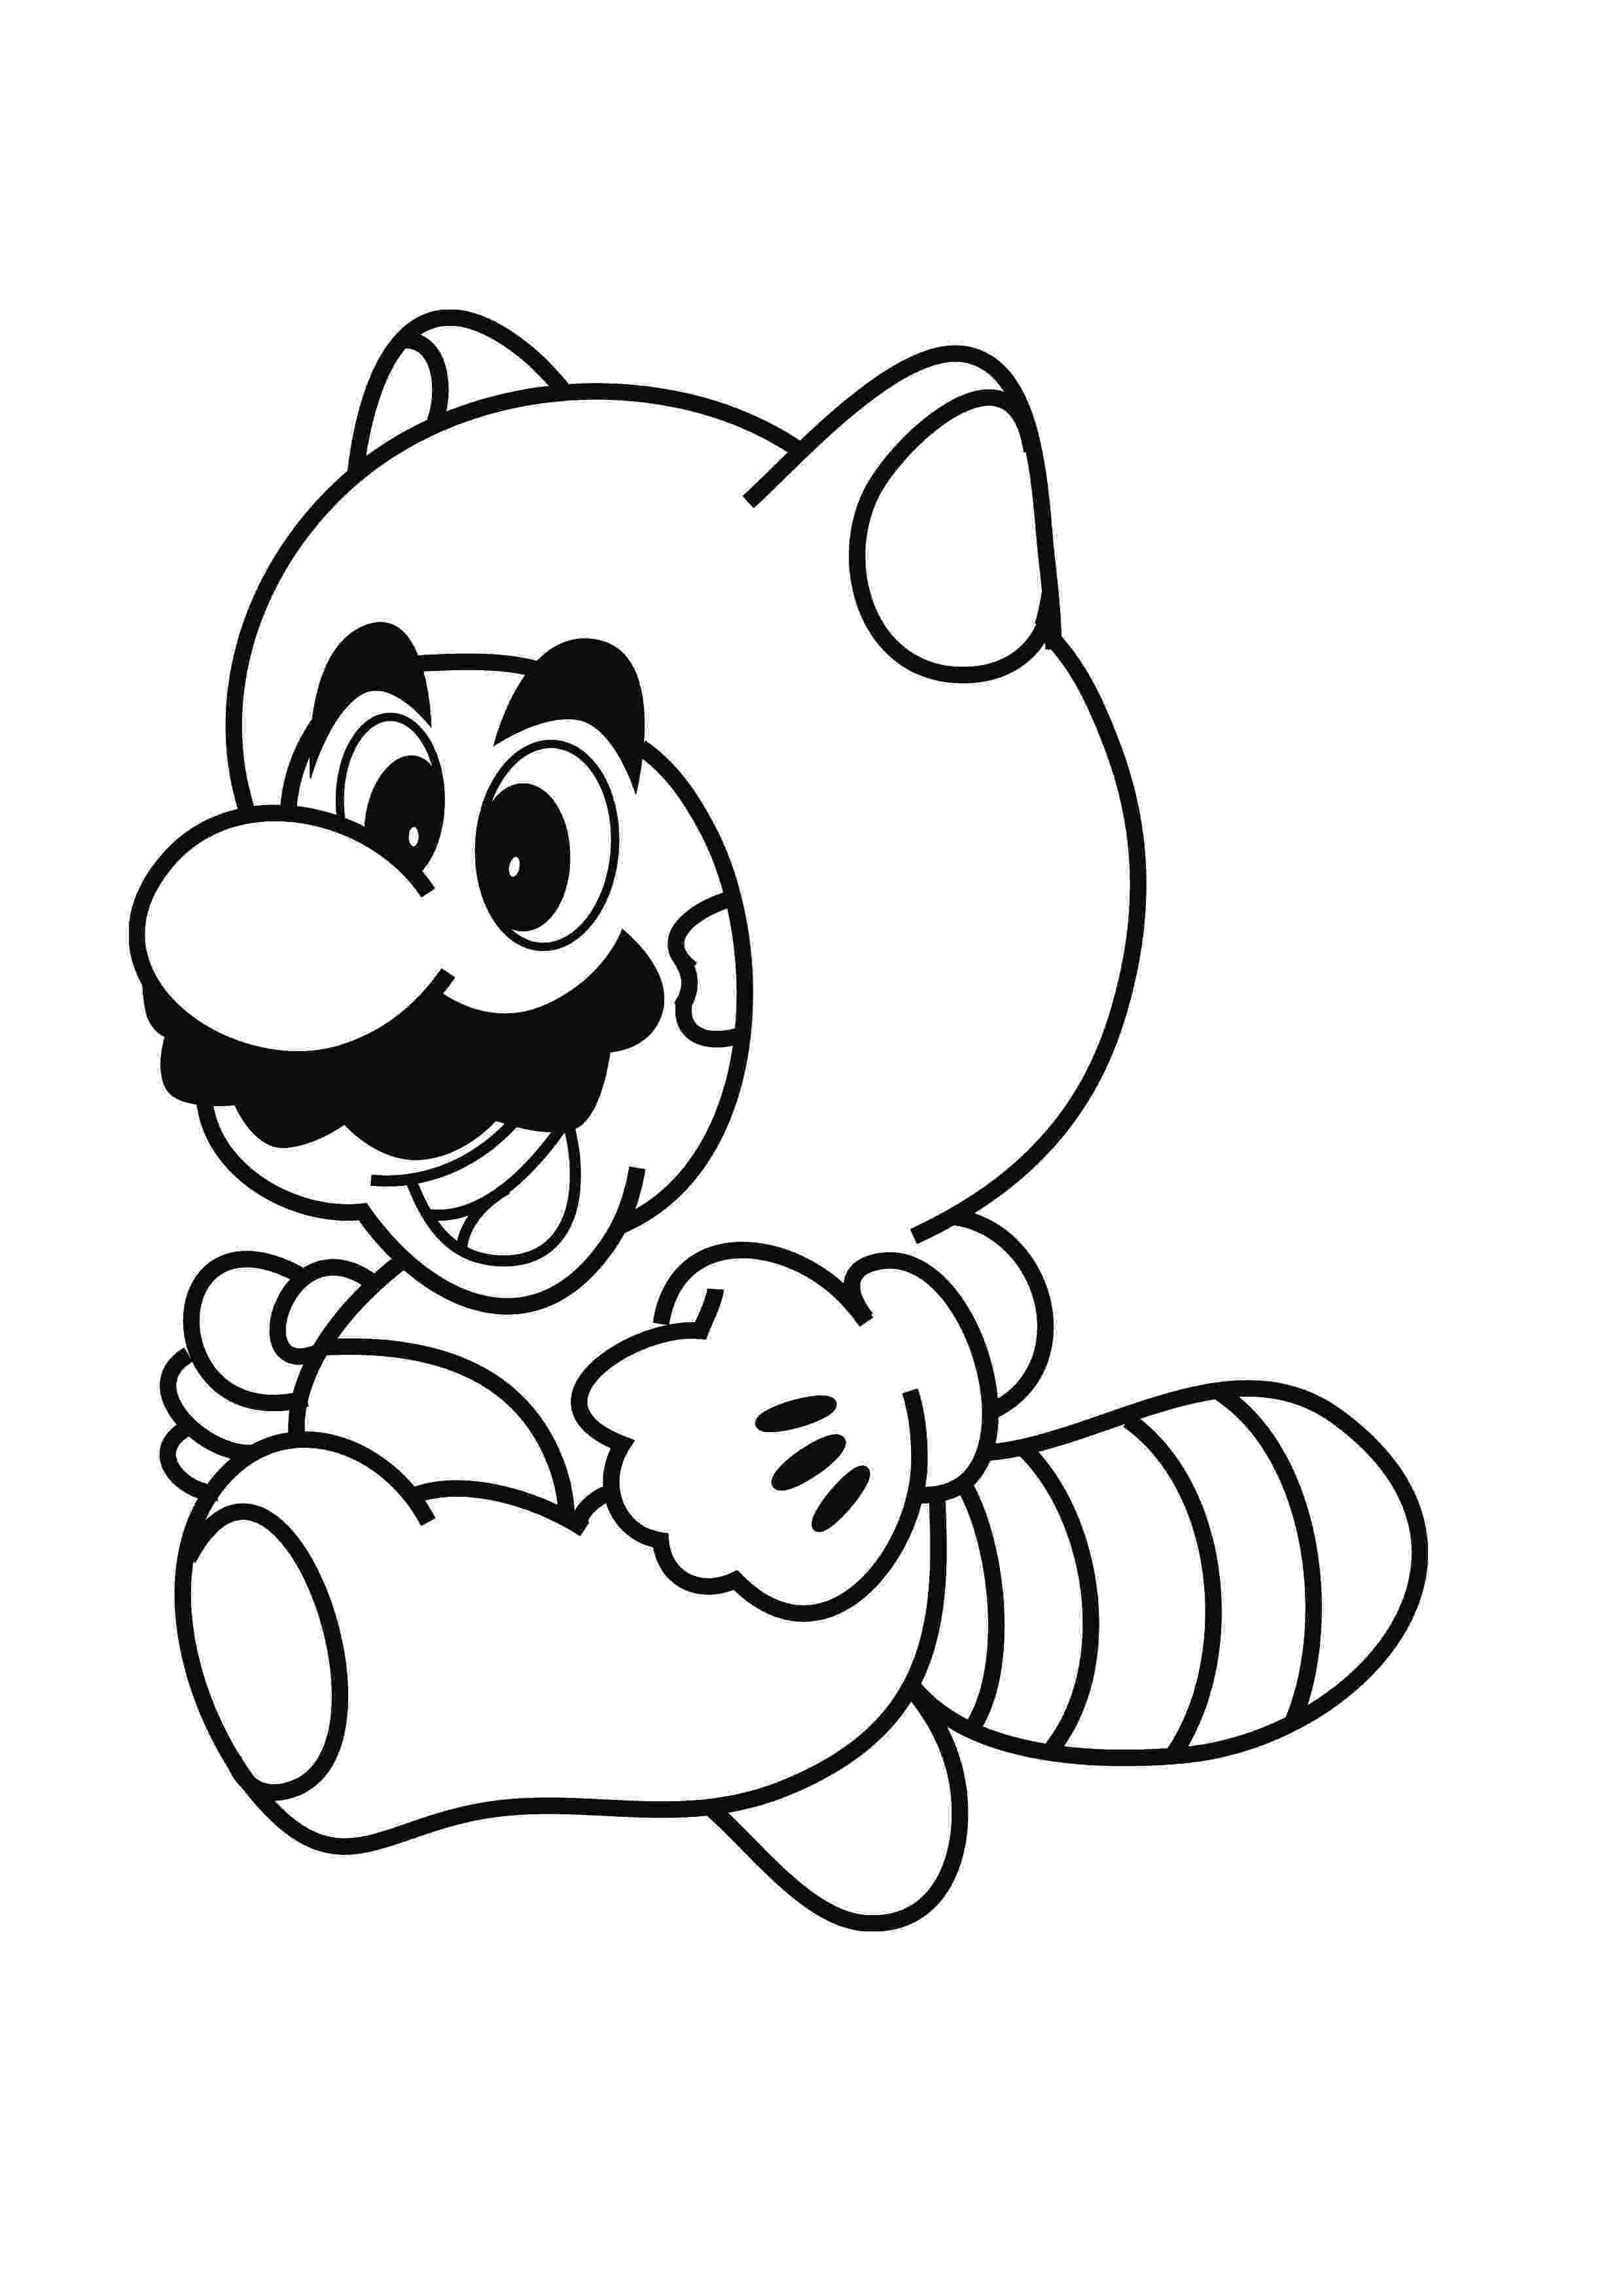 super mario bros pictures to print and colour all super mario coloring page wecoloringpagecom mario to pictures print and colour bros super 